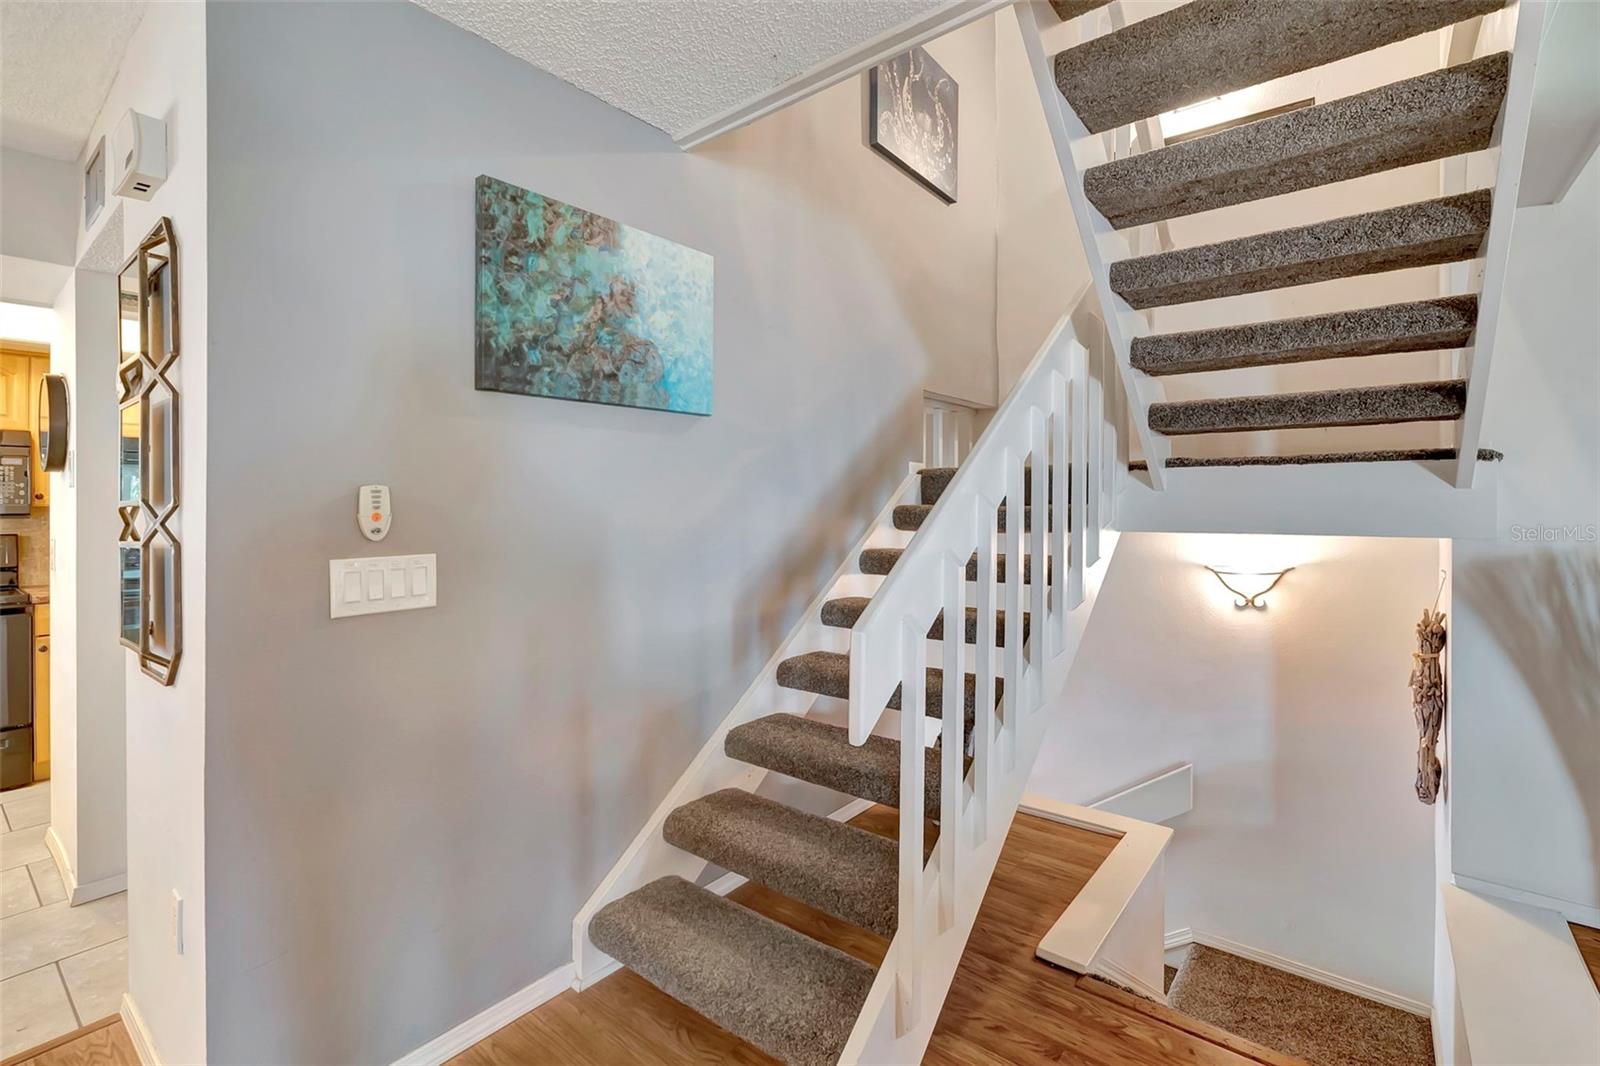 The stairs from the first floor living space lead to the bedrooms.